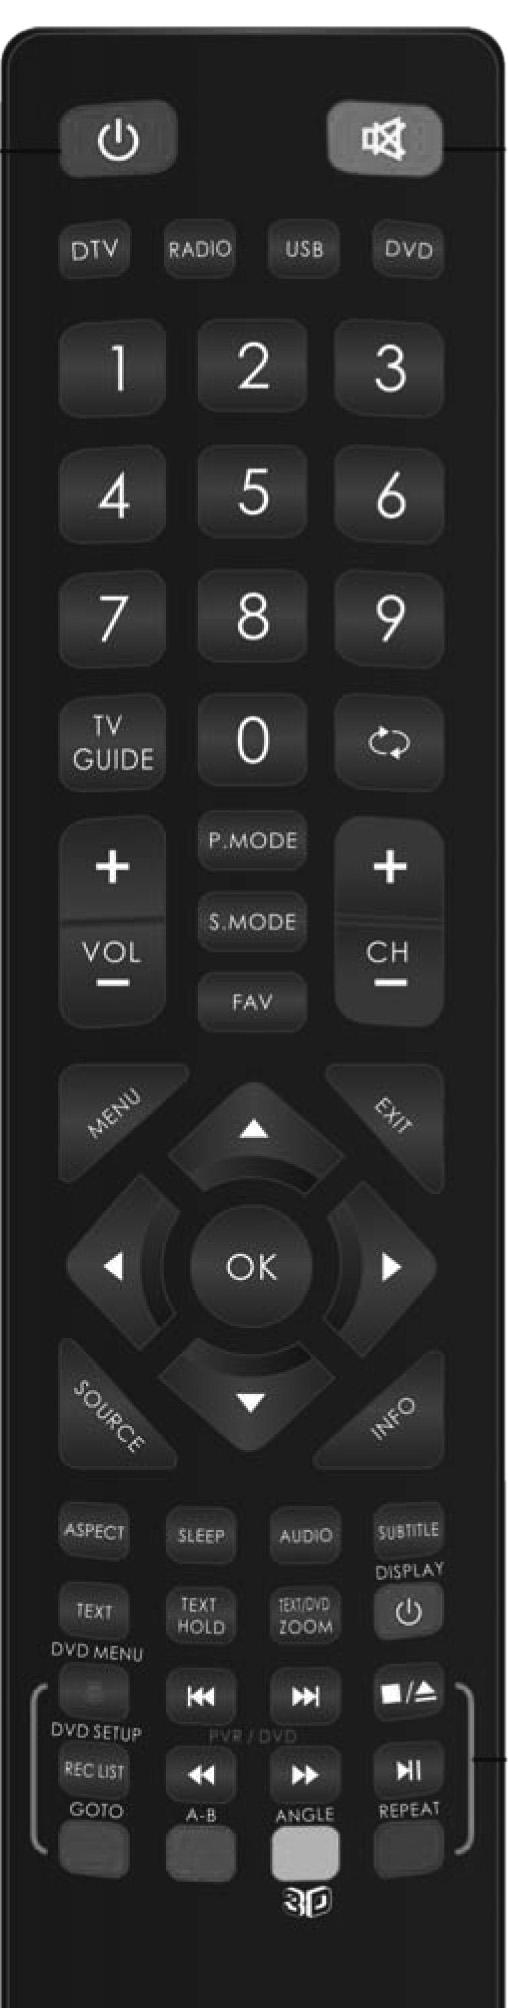 Remote control REMOTE CONTROL On initial set up of your TV you ll need to pair the remote control to the TV.